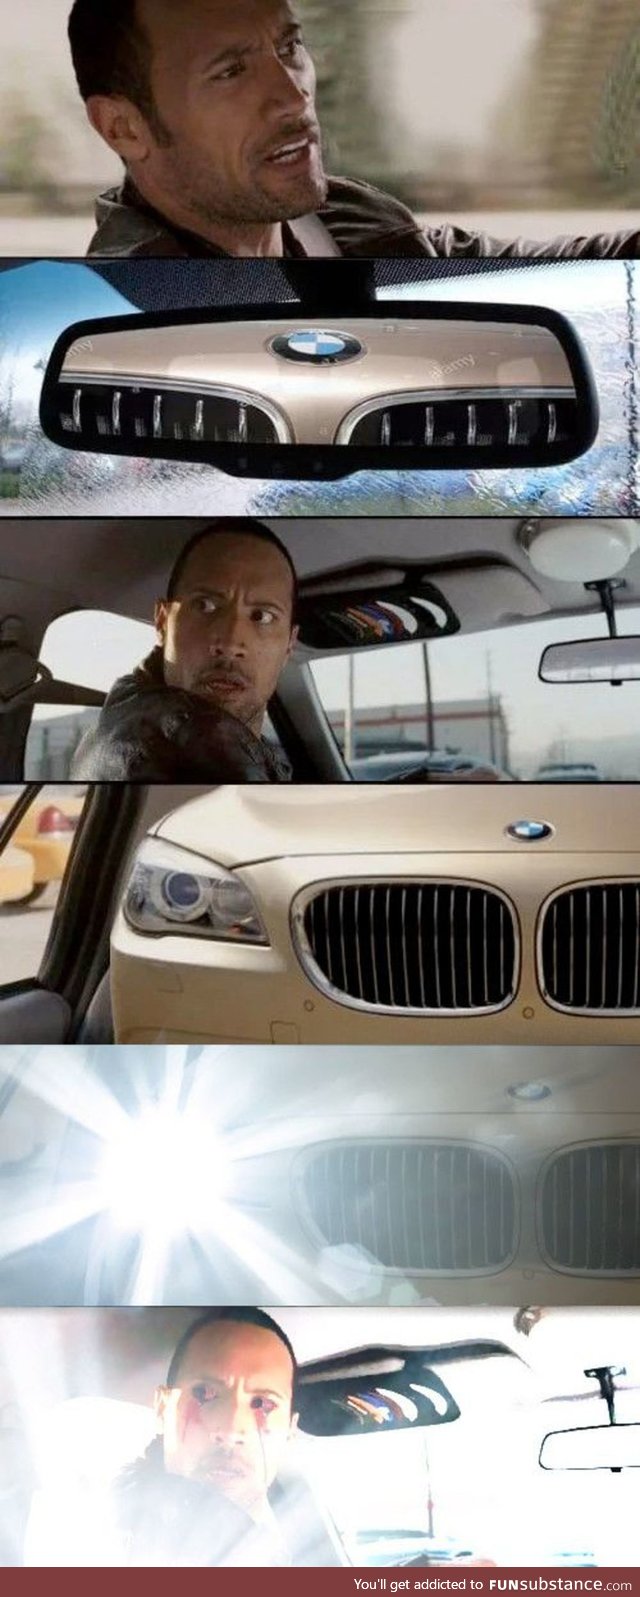 So basically, this is your average BMW driver